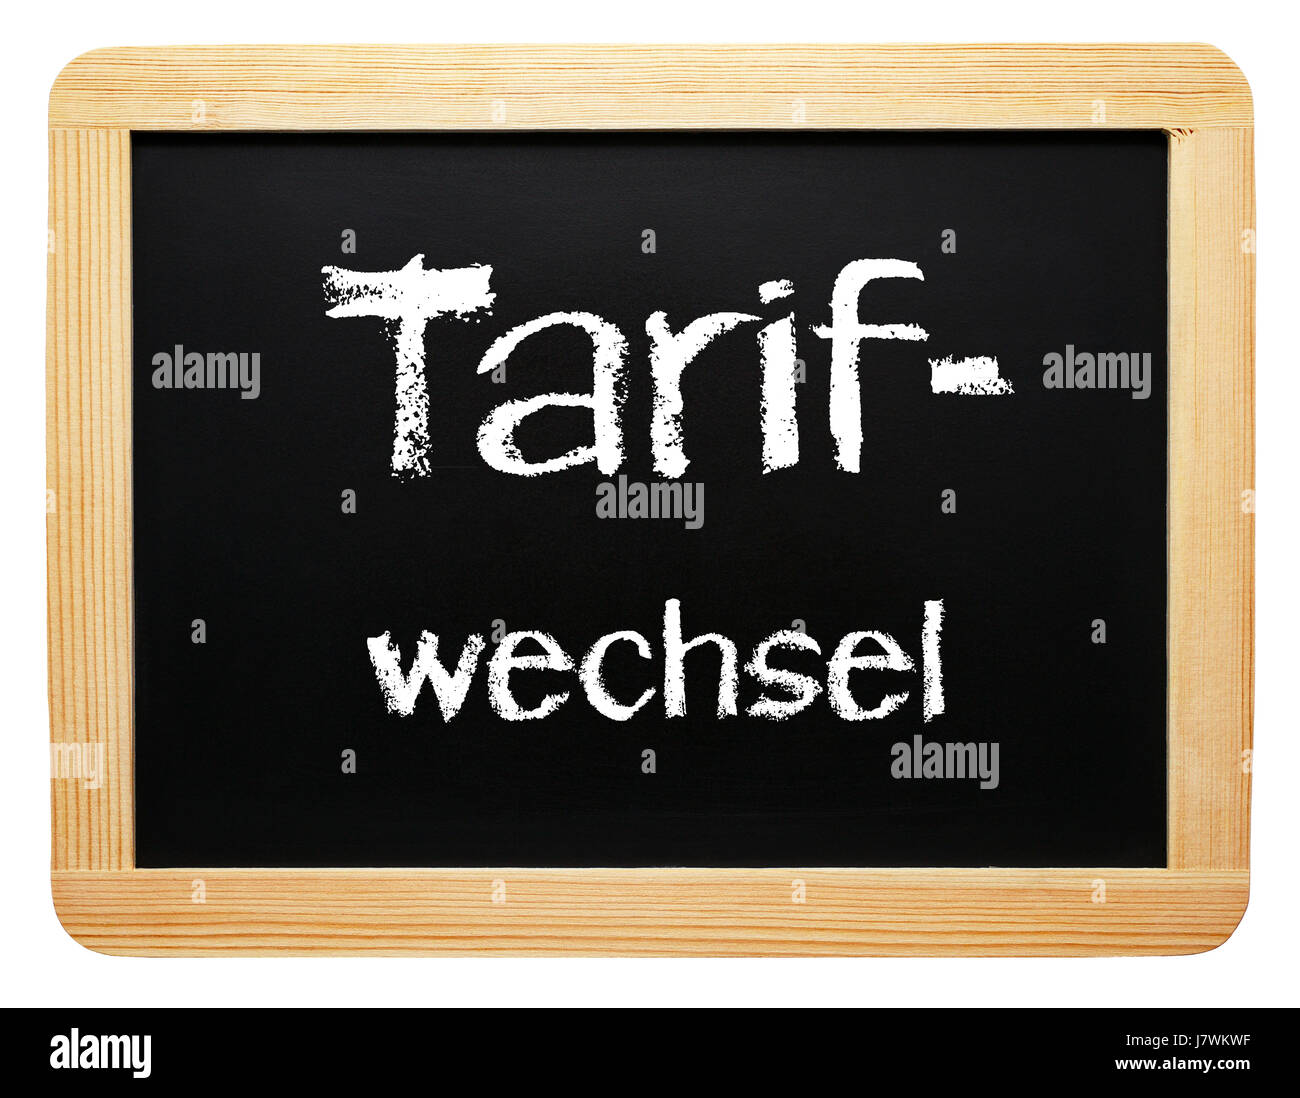 Tariff board Cut Out Stock Images & Pictures - Alamy